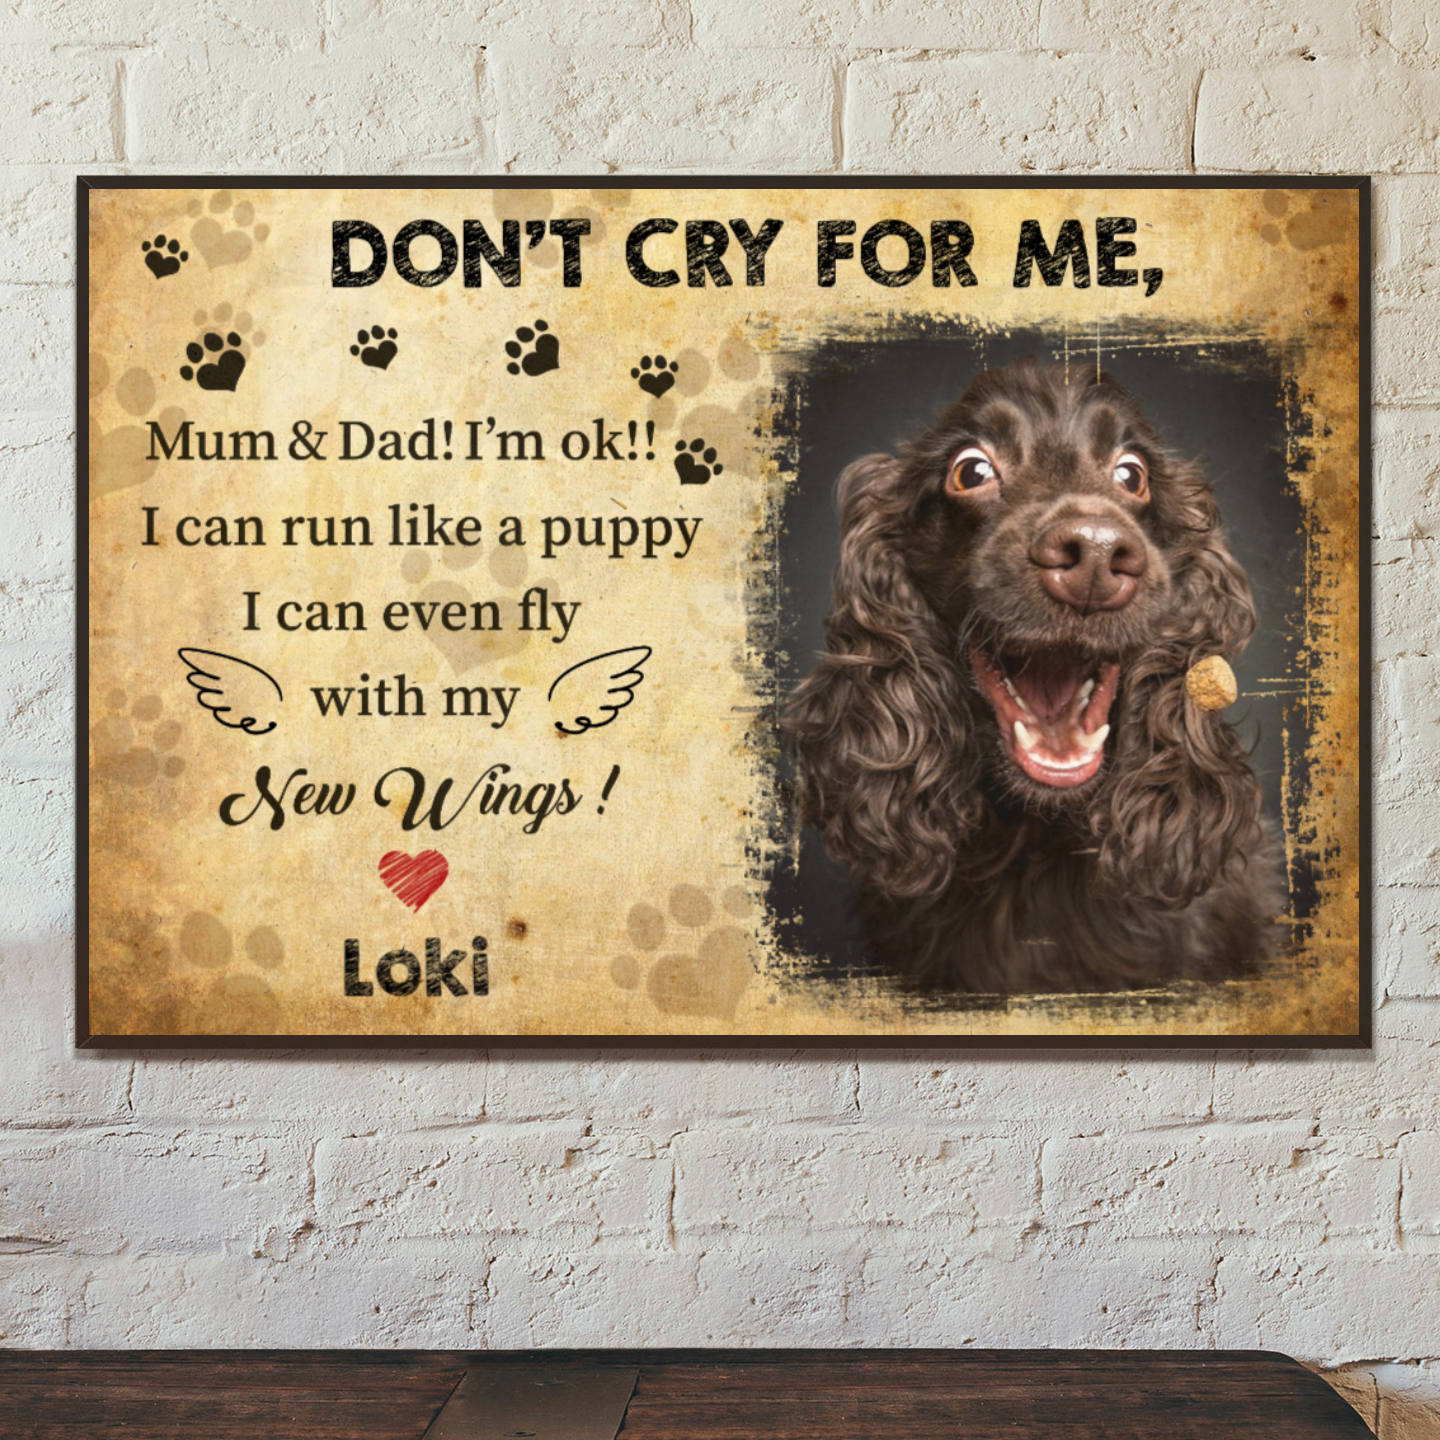 Personalized Canvas/Canvas with Frame/Poster For Pet Lovers - Don't cry for me. Mum & Dad I'm ok-Dogs upload Image up to 4 Pets/Dogs/Cats - Furlidays